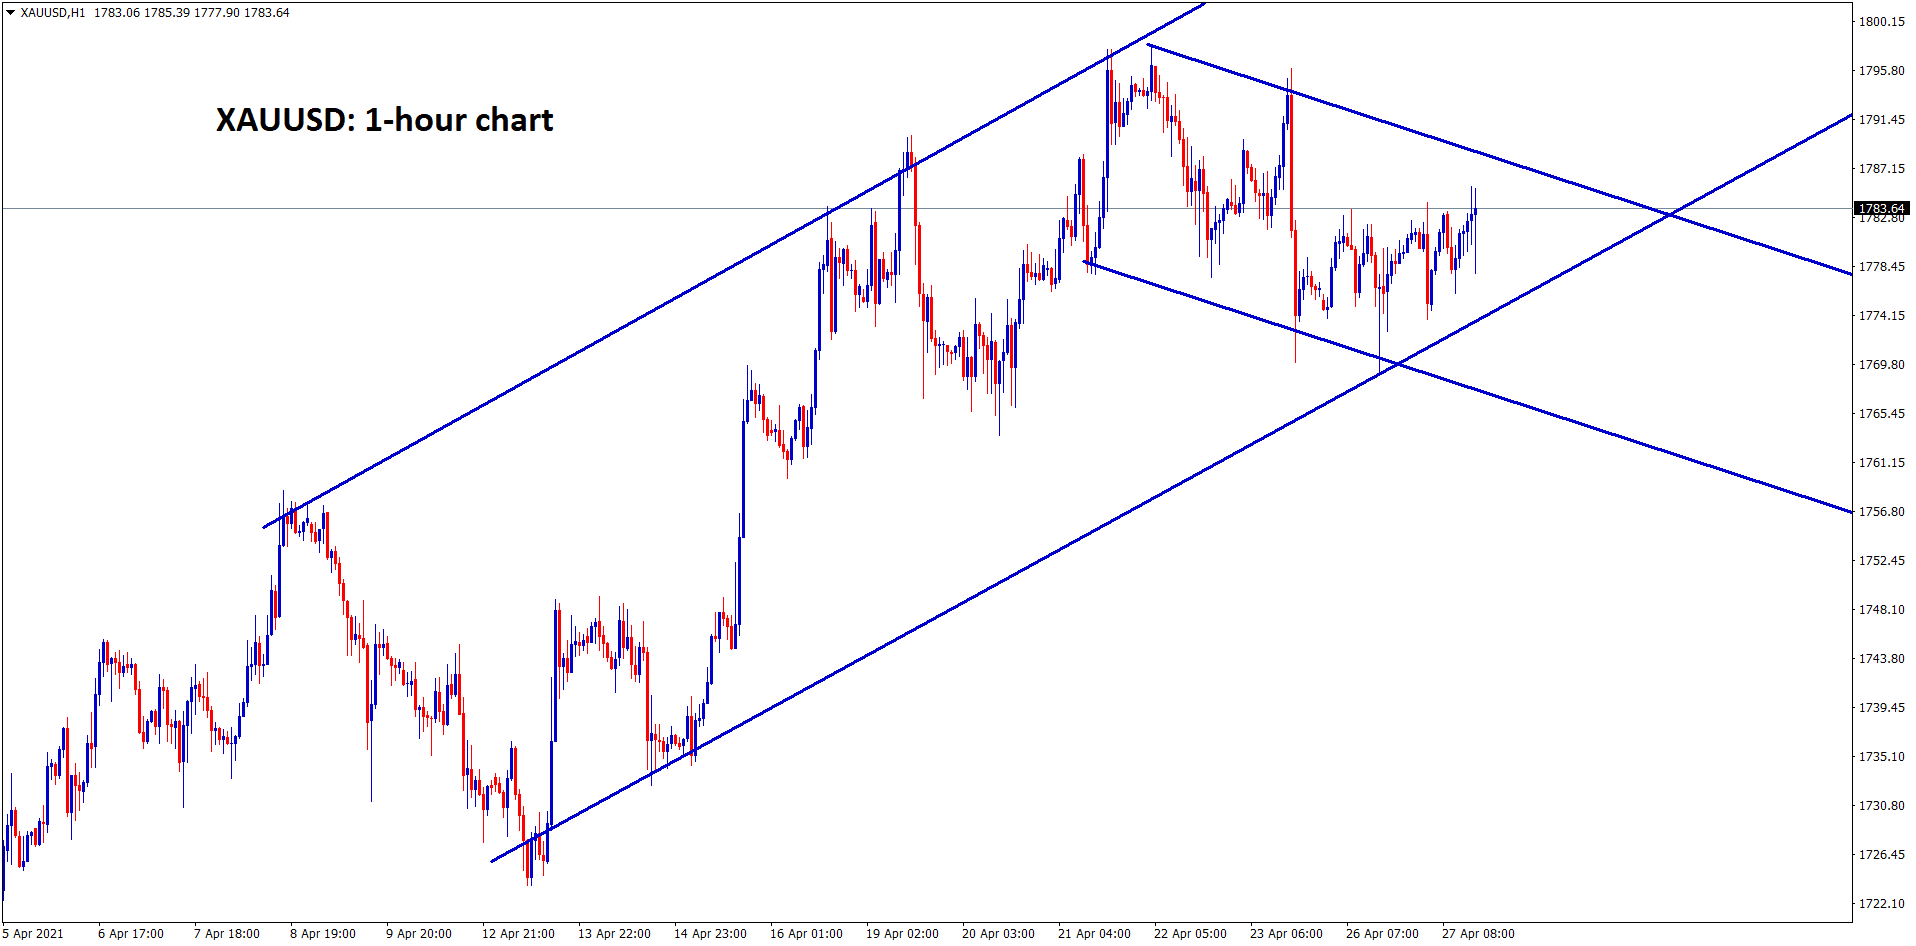 Gold is moving between the channel ranges.